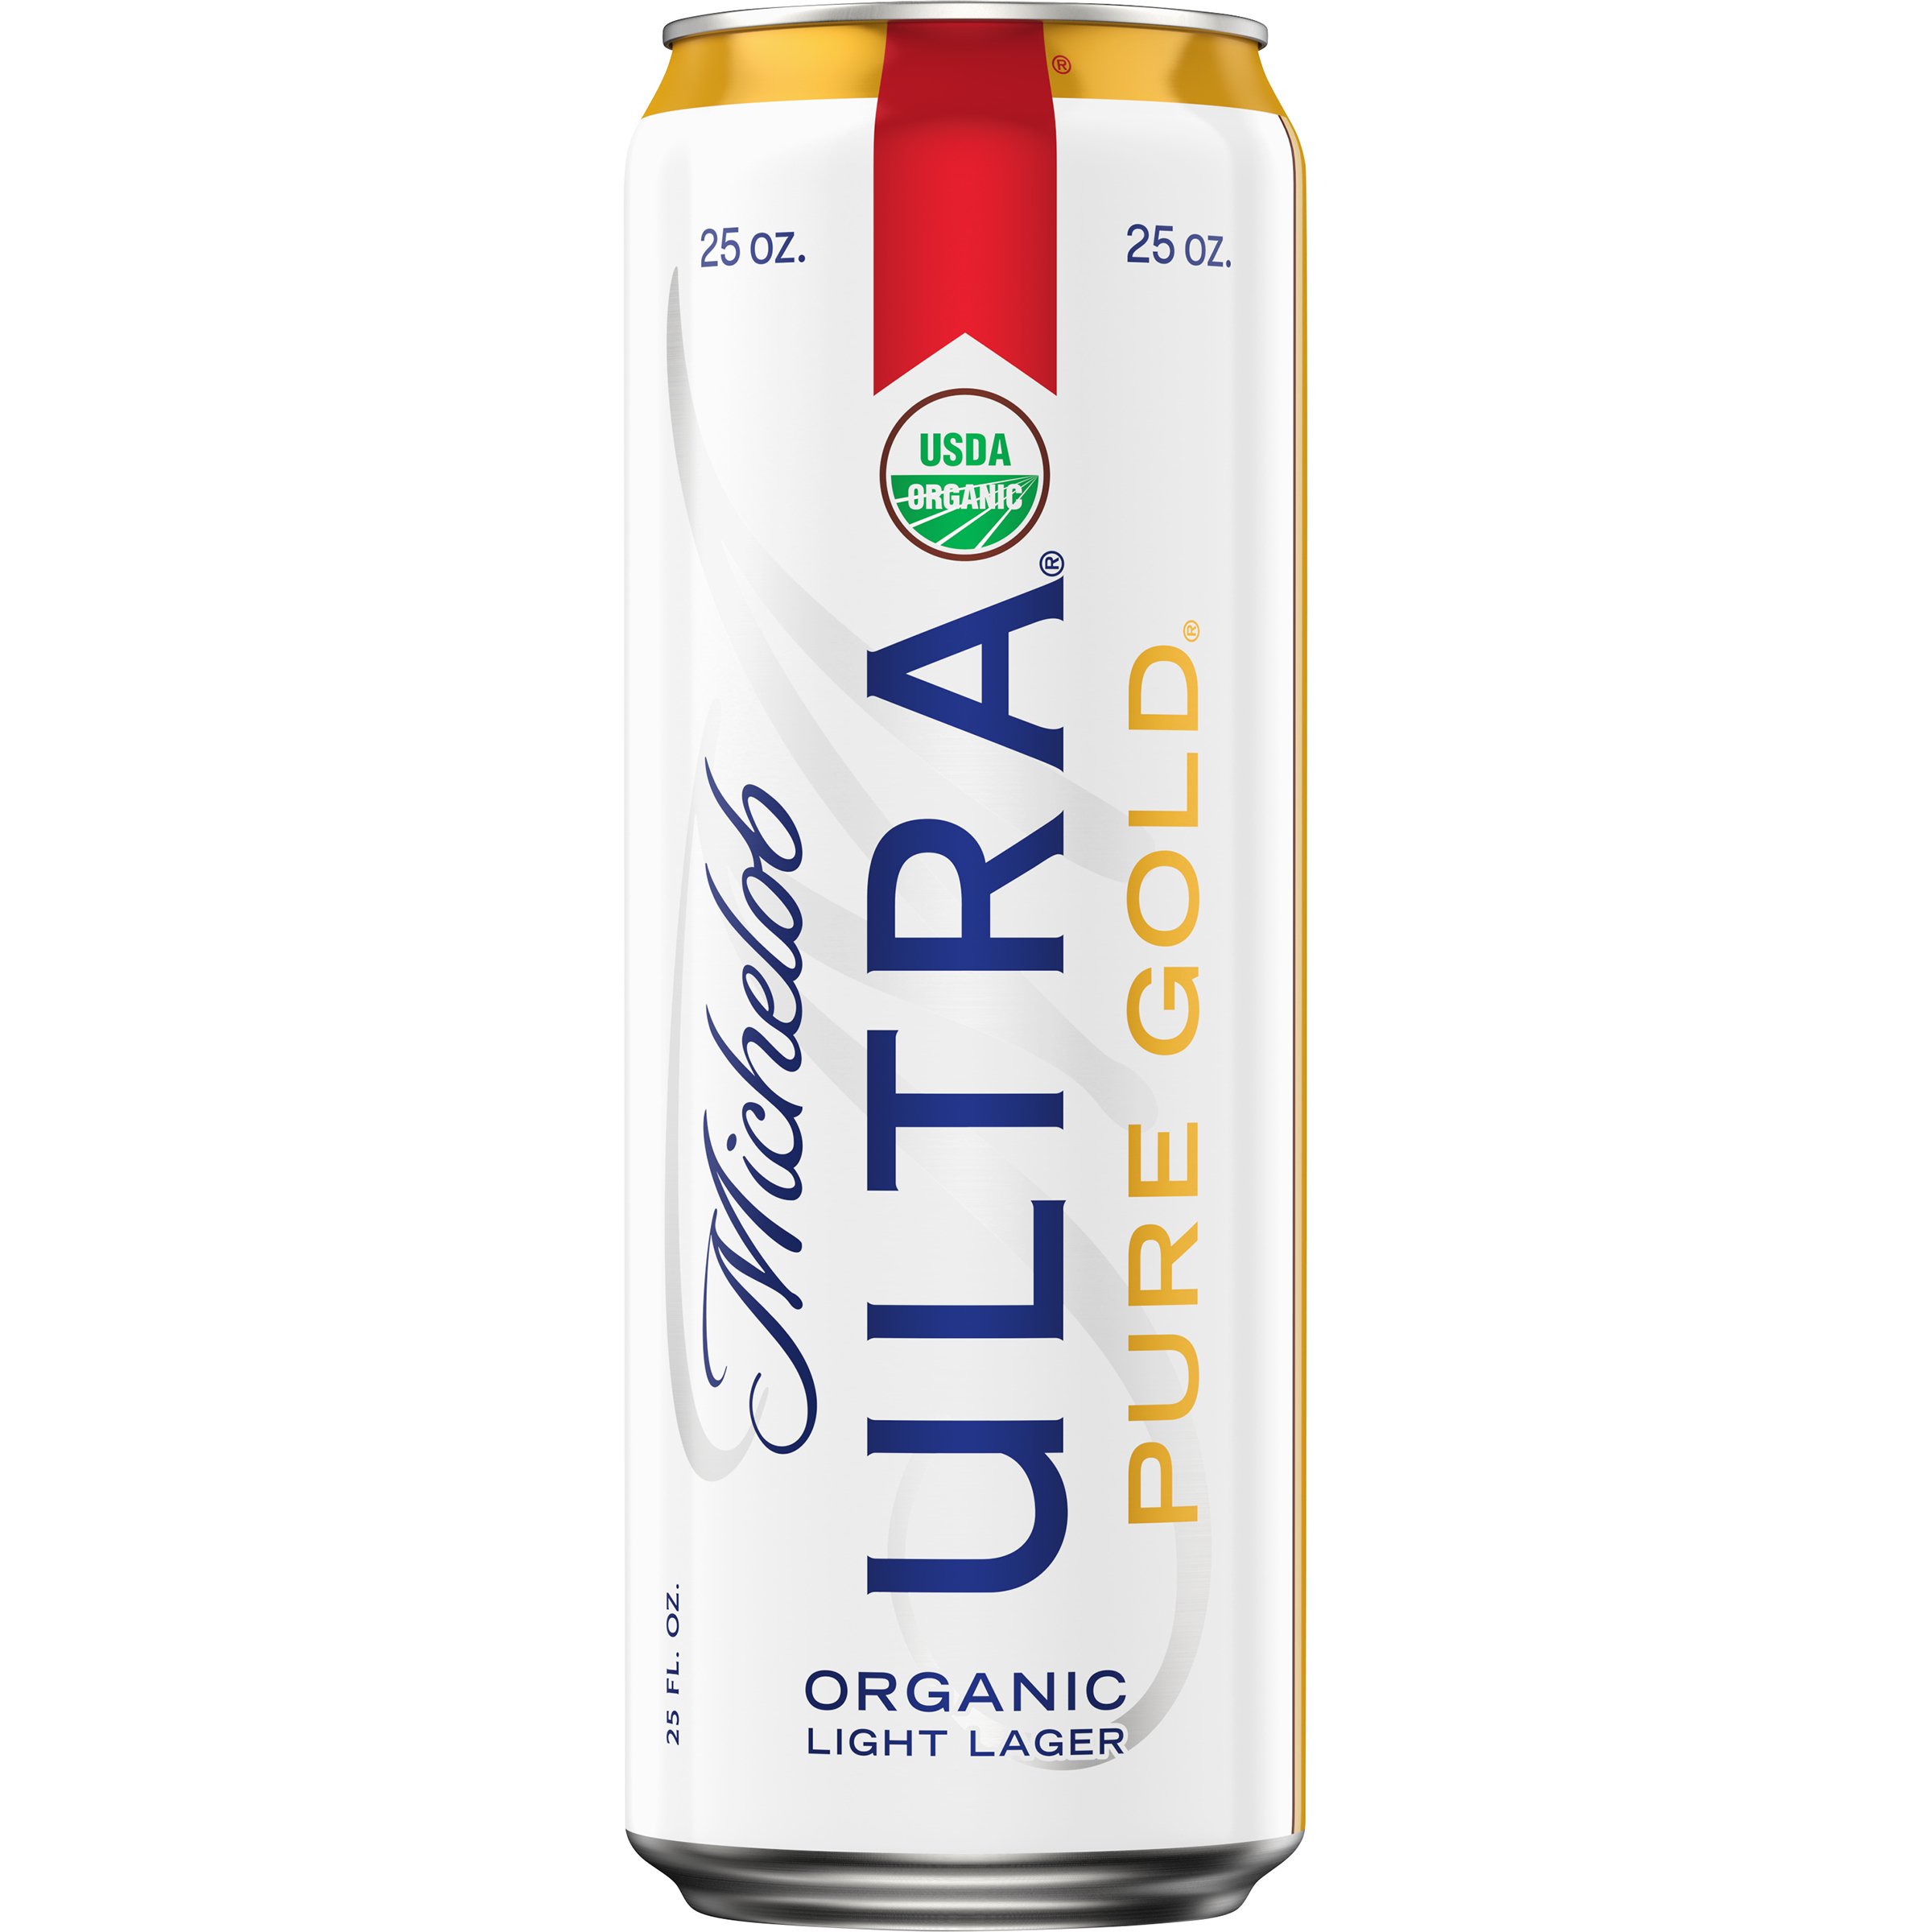 michelob-ultra-archives-alcohol-content